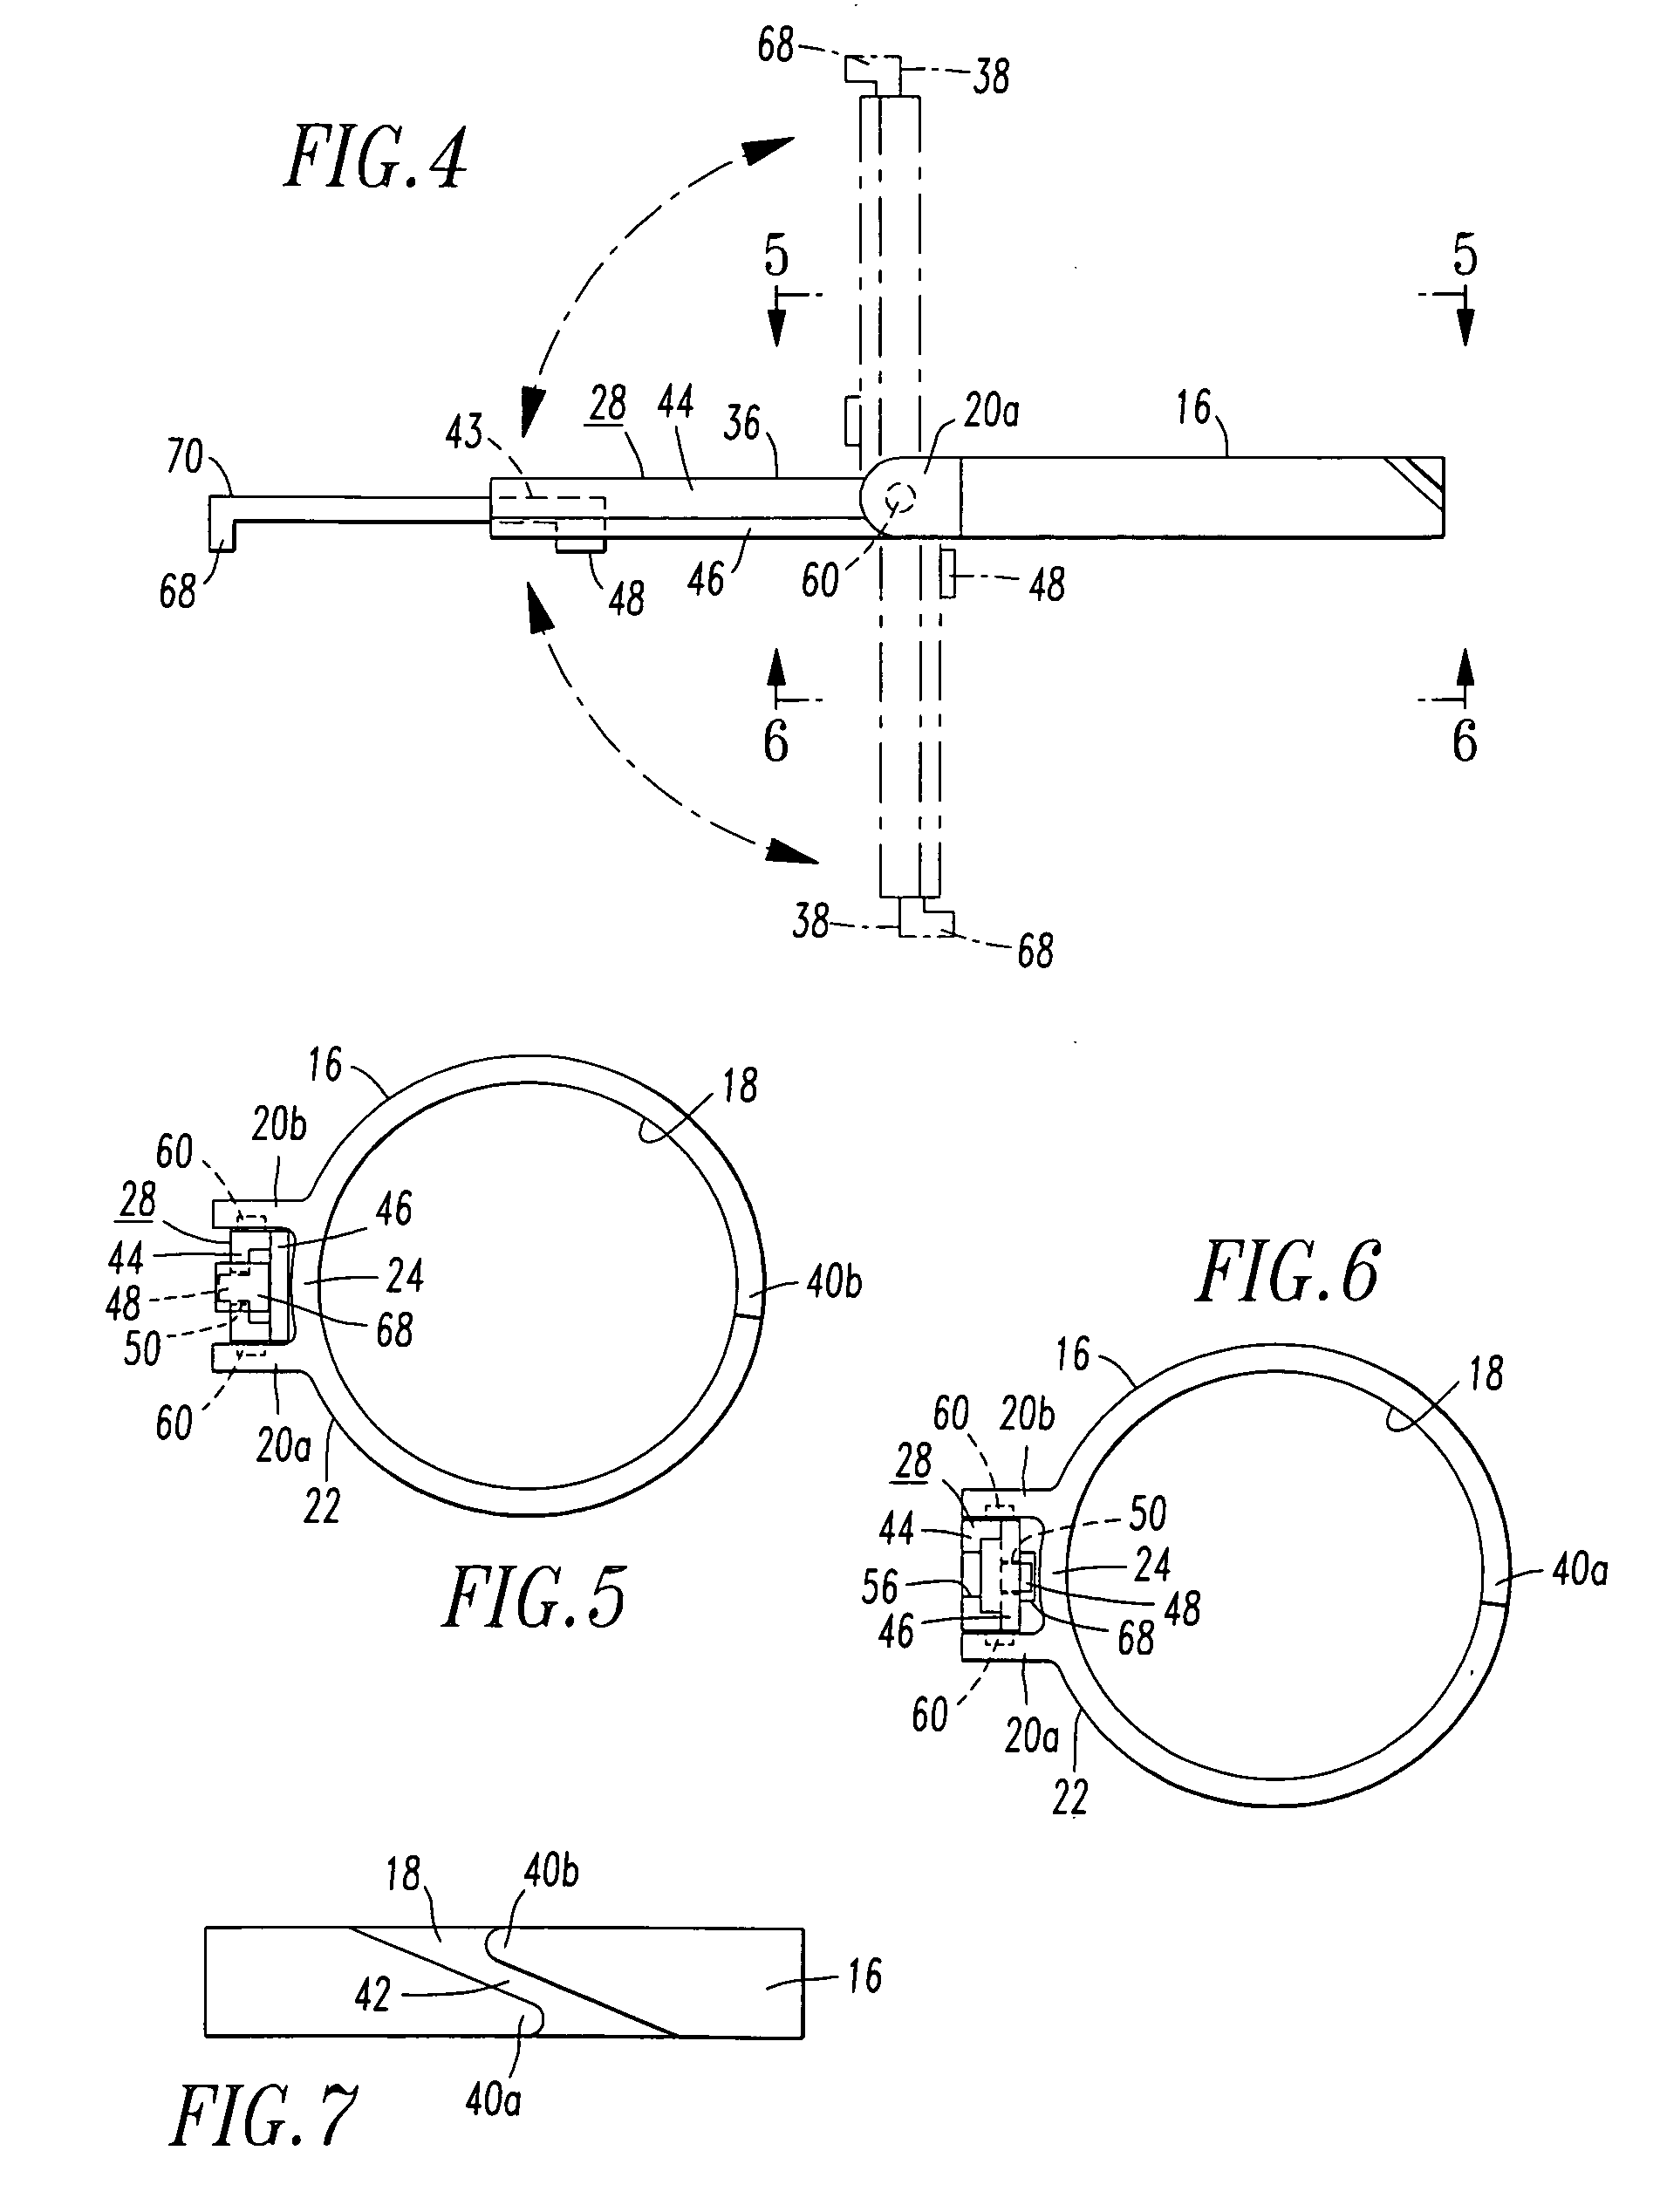 Ornamental thumb or finger ring with secured hidden contact interface input device